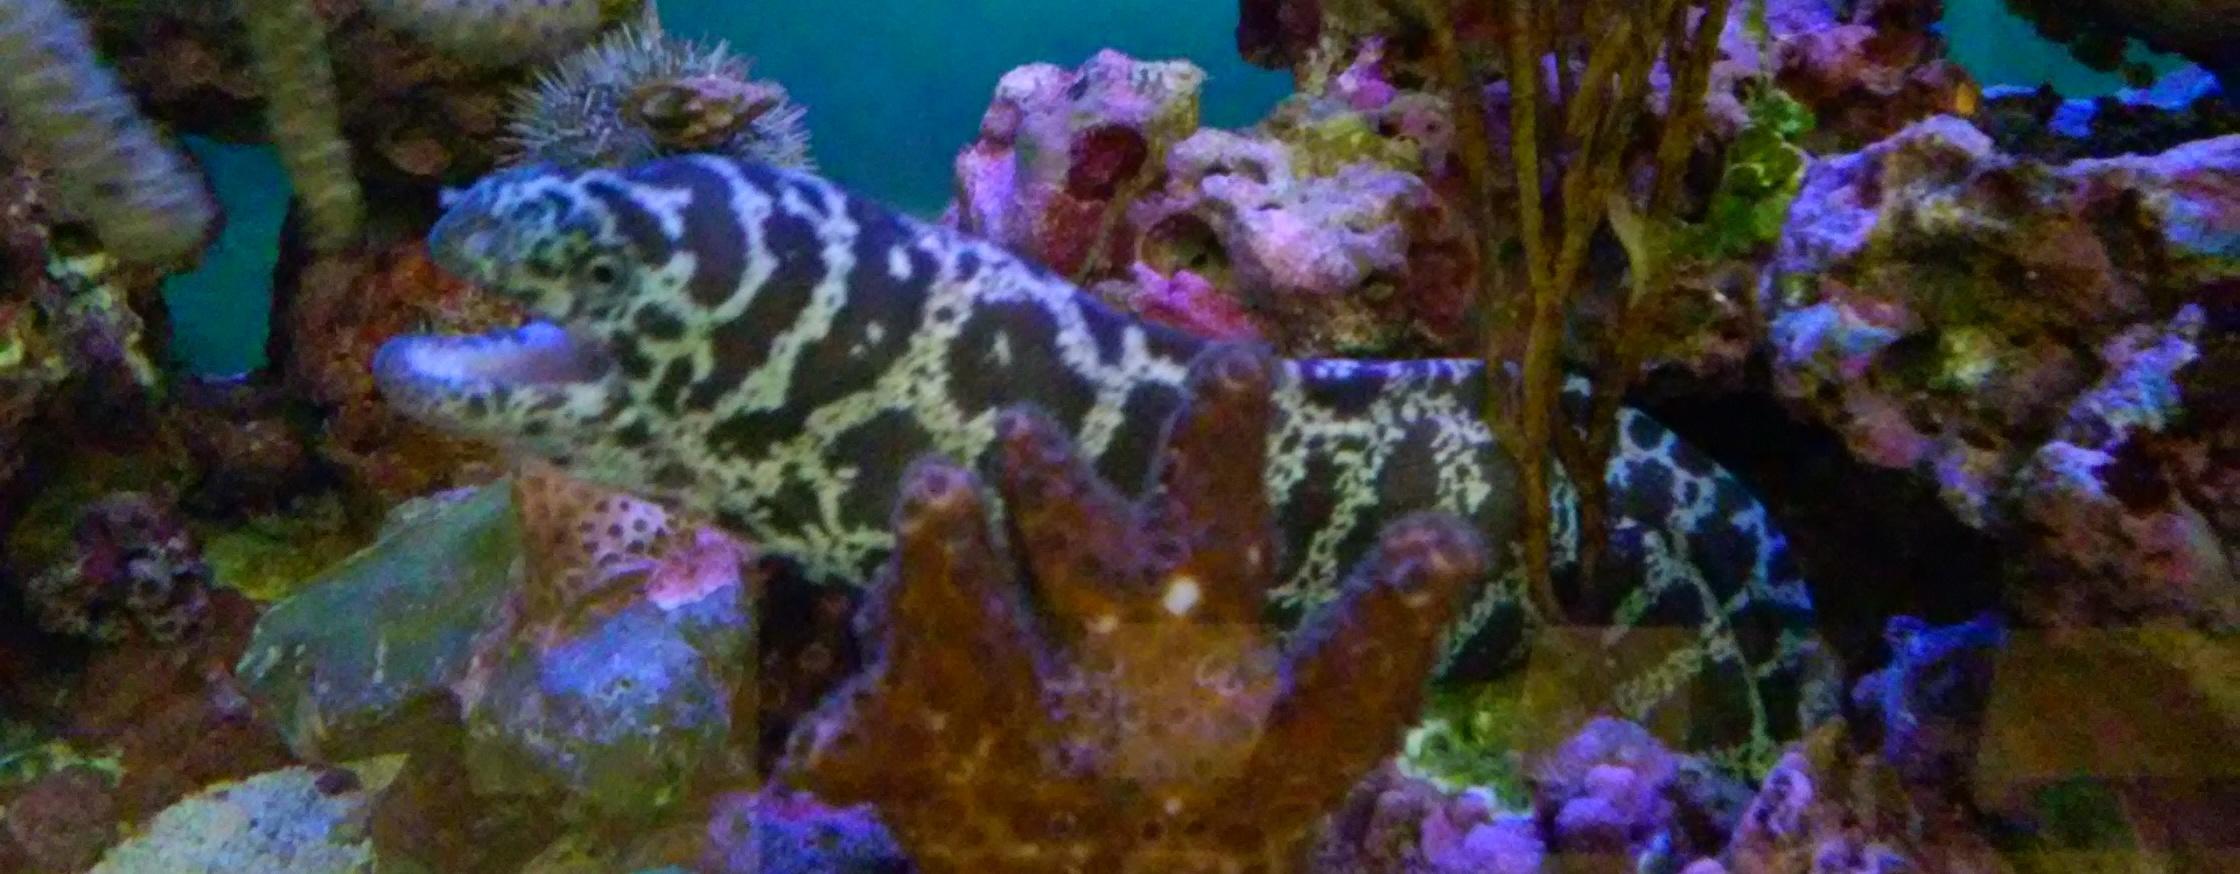 eel poking it's head out of an artificial reef